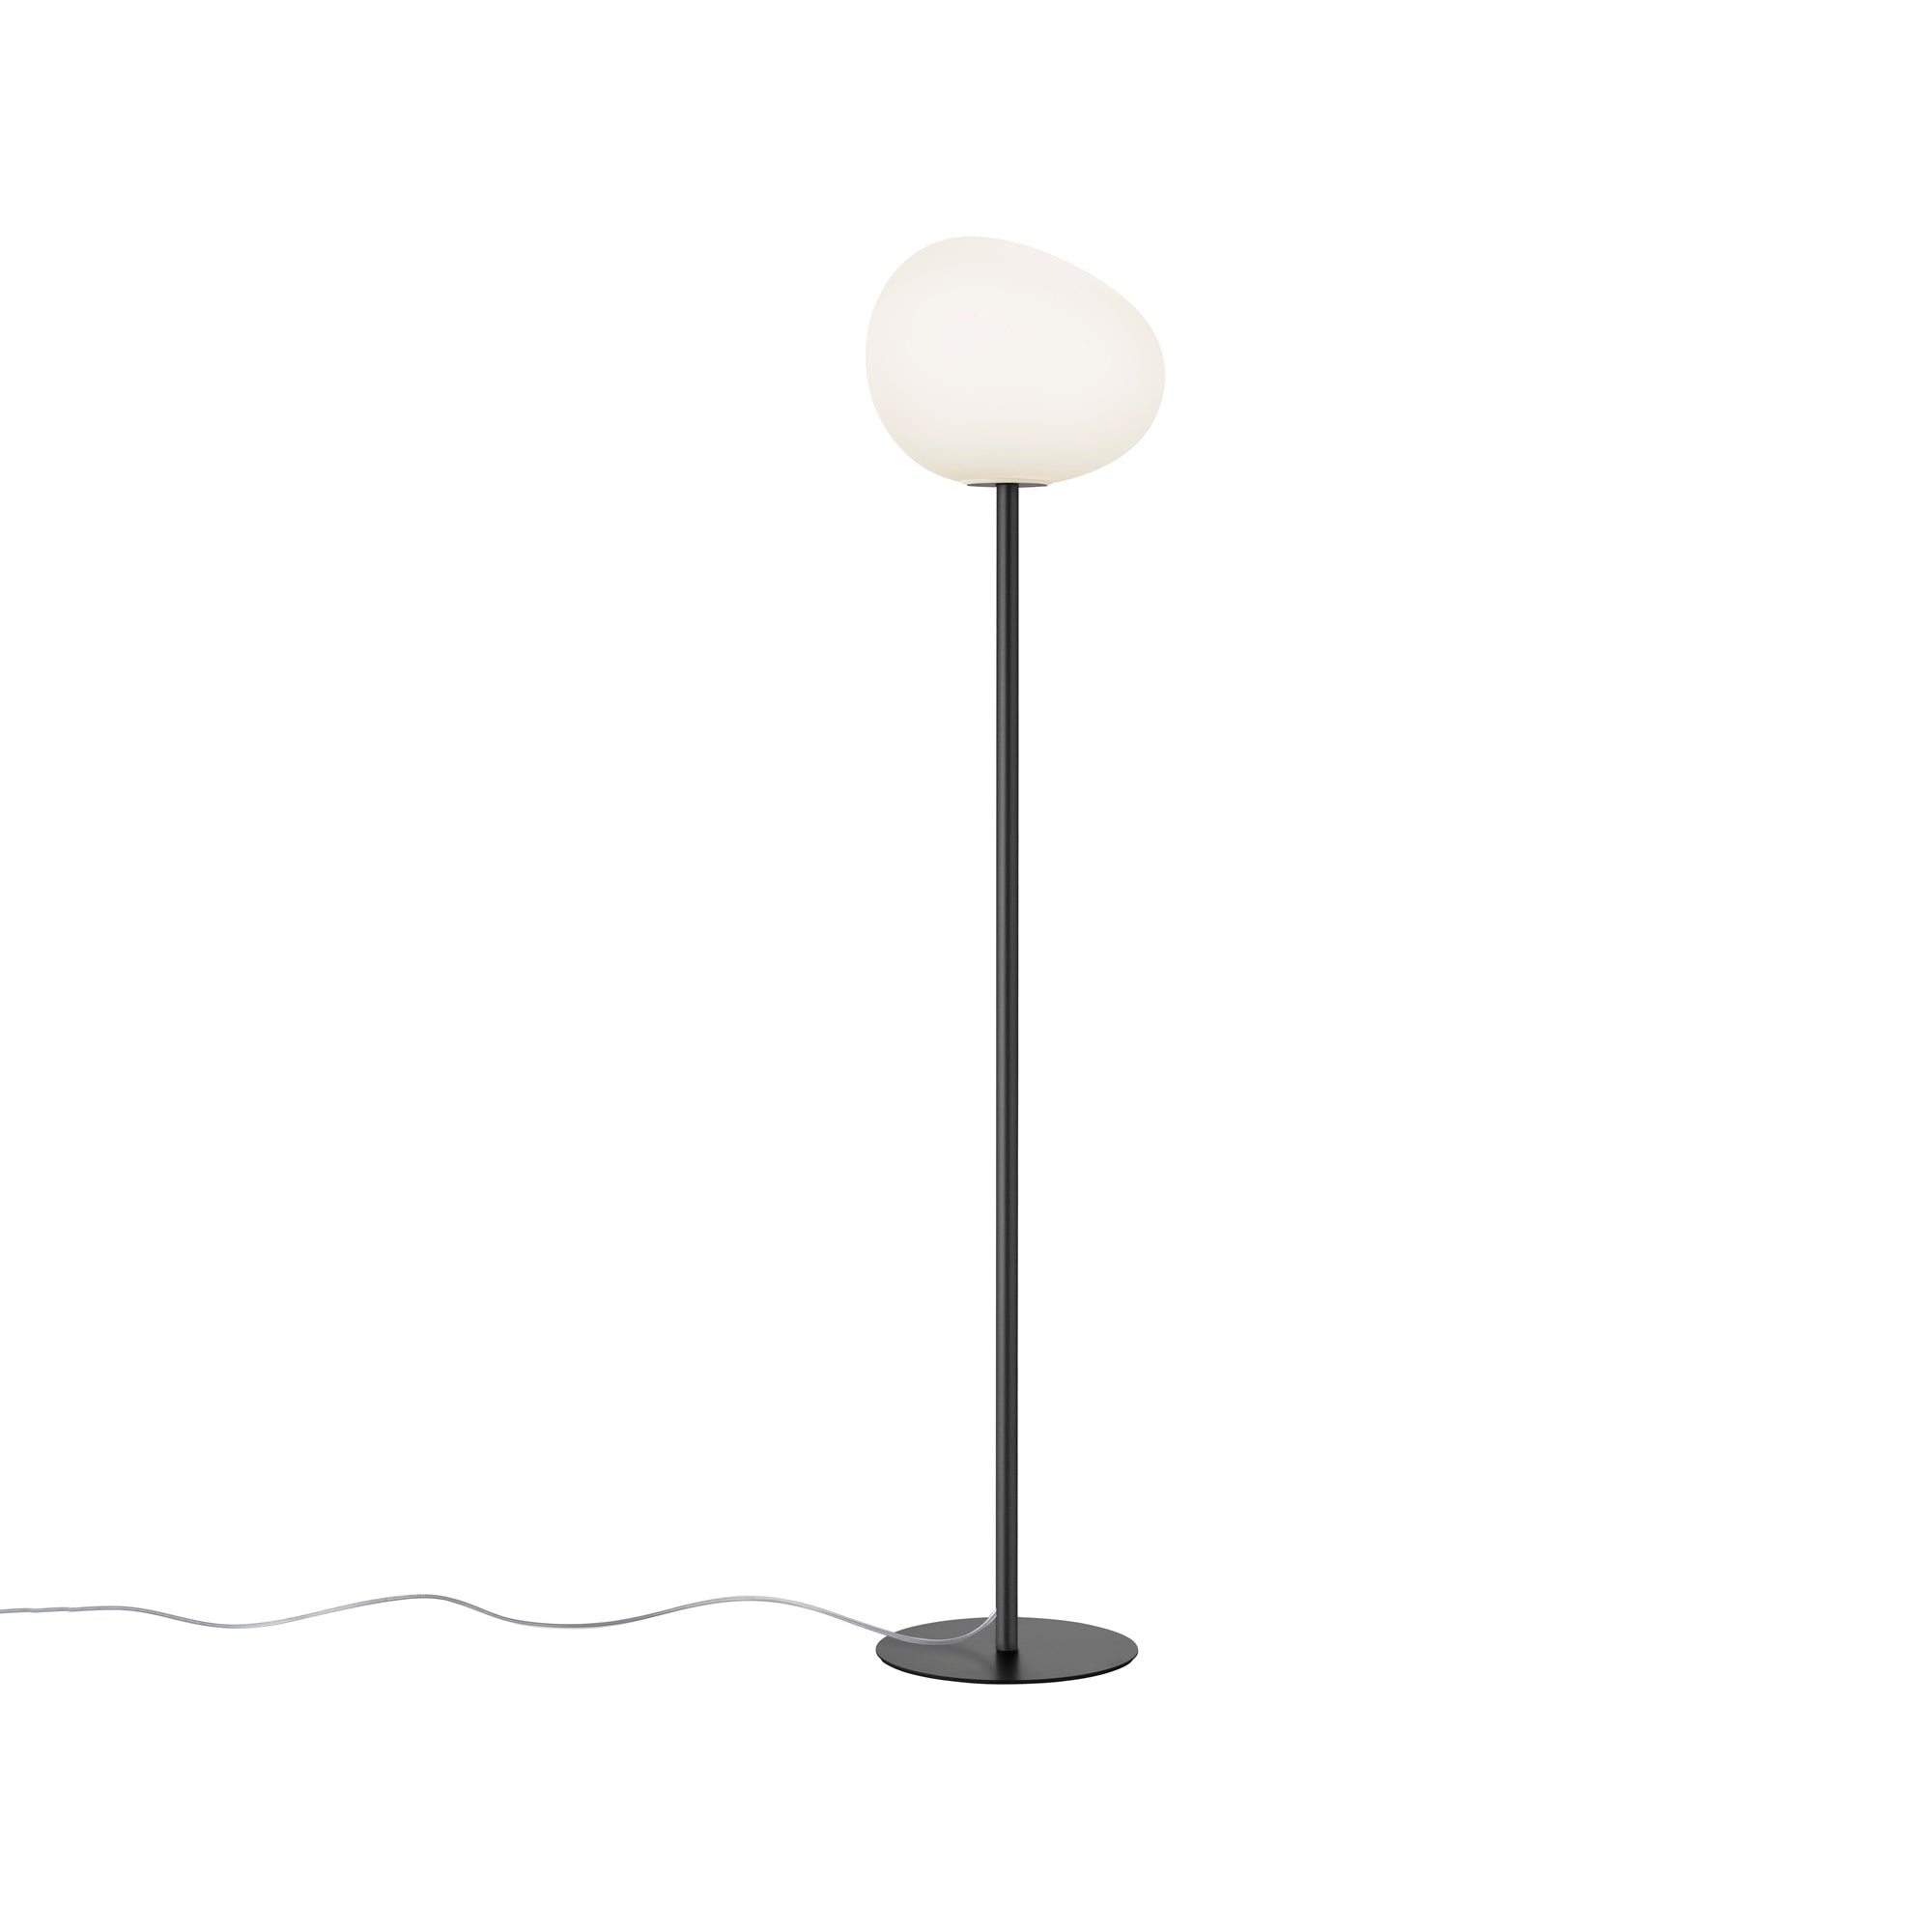 Gregg Table and Floor Lamp